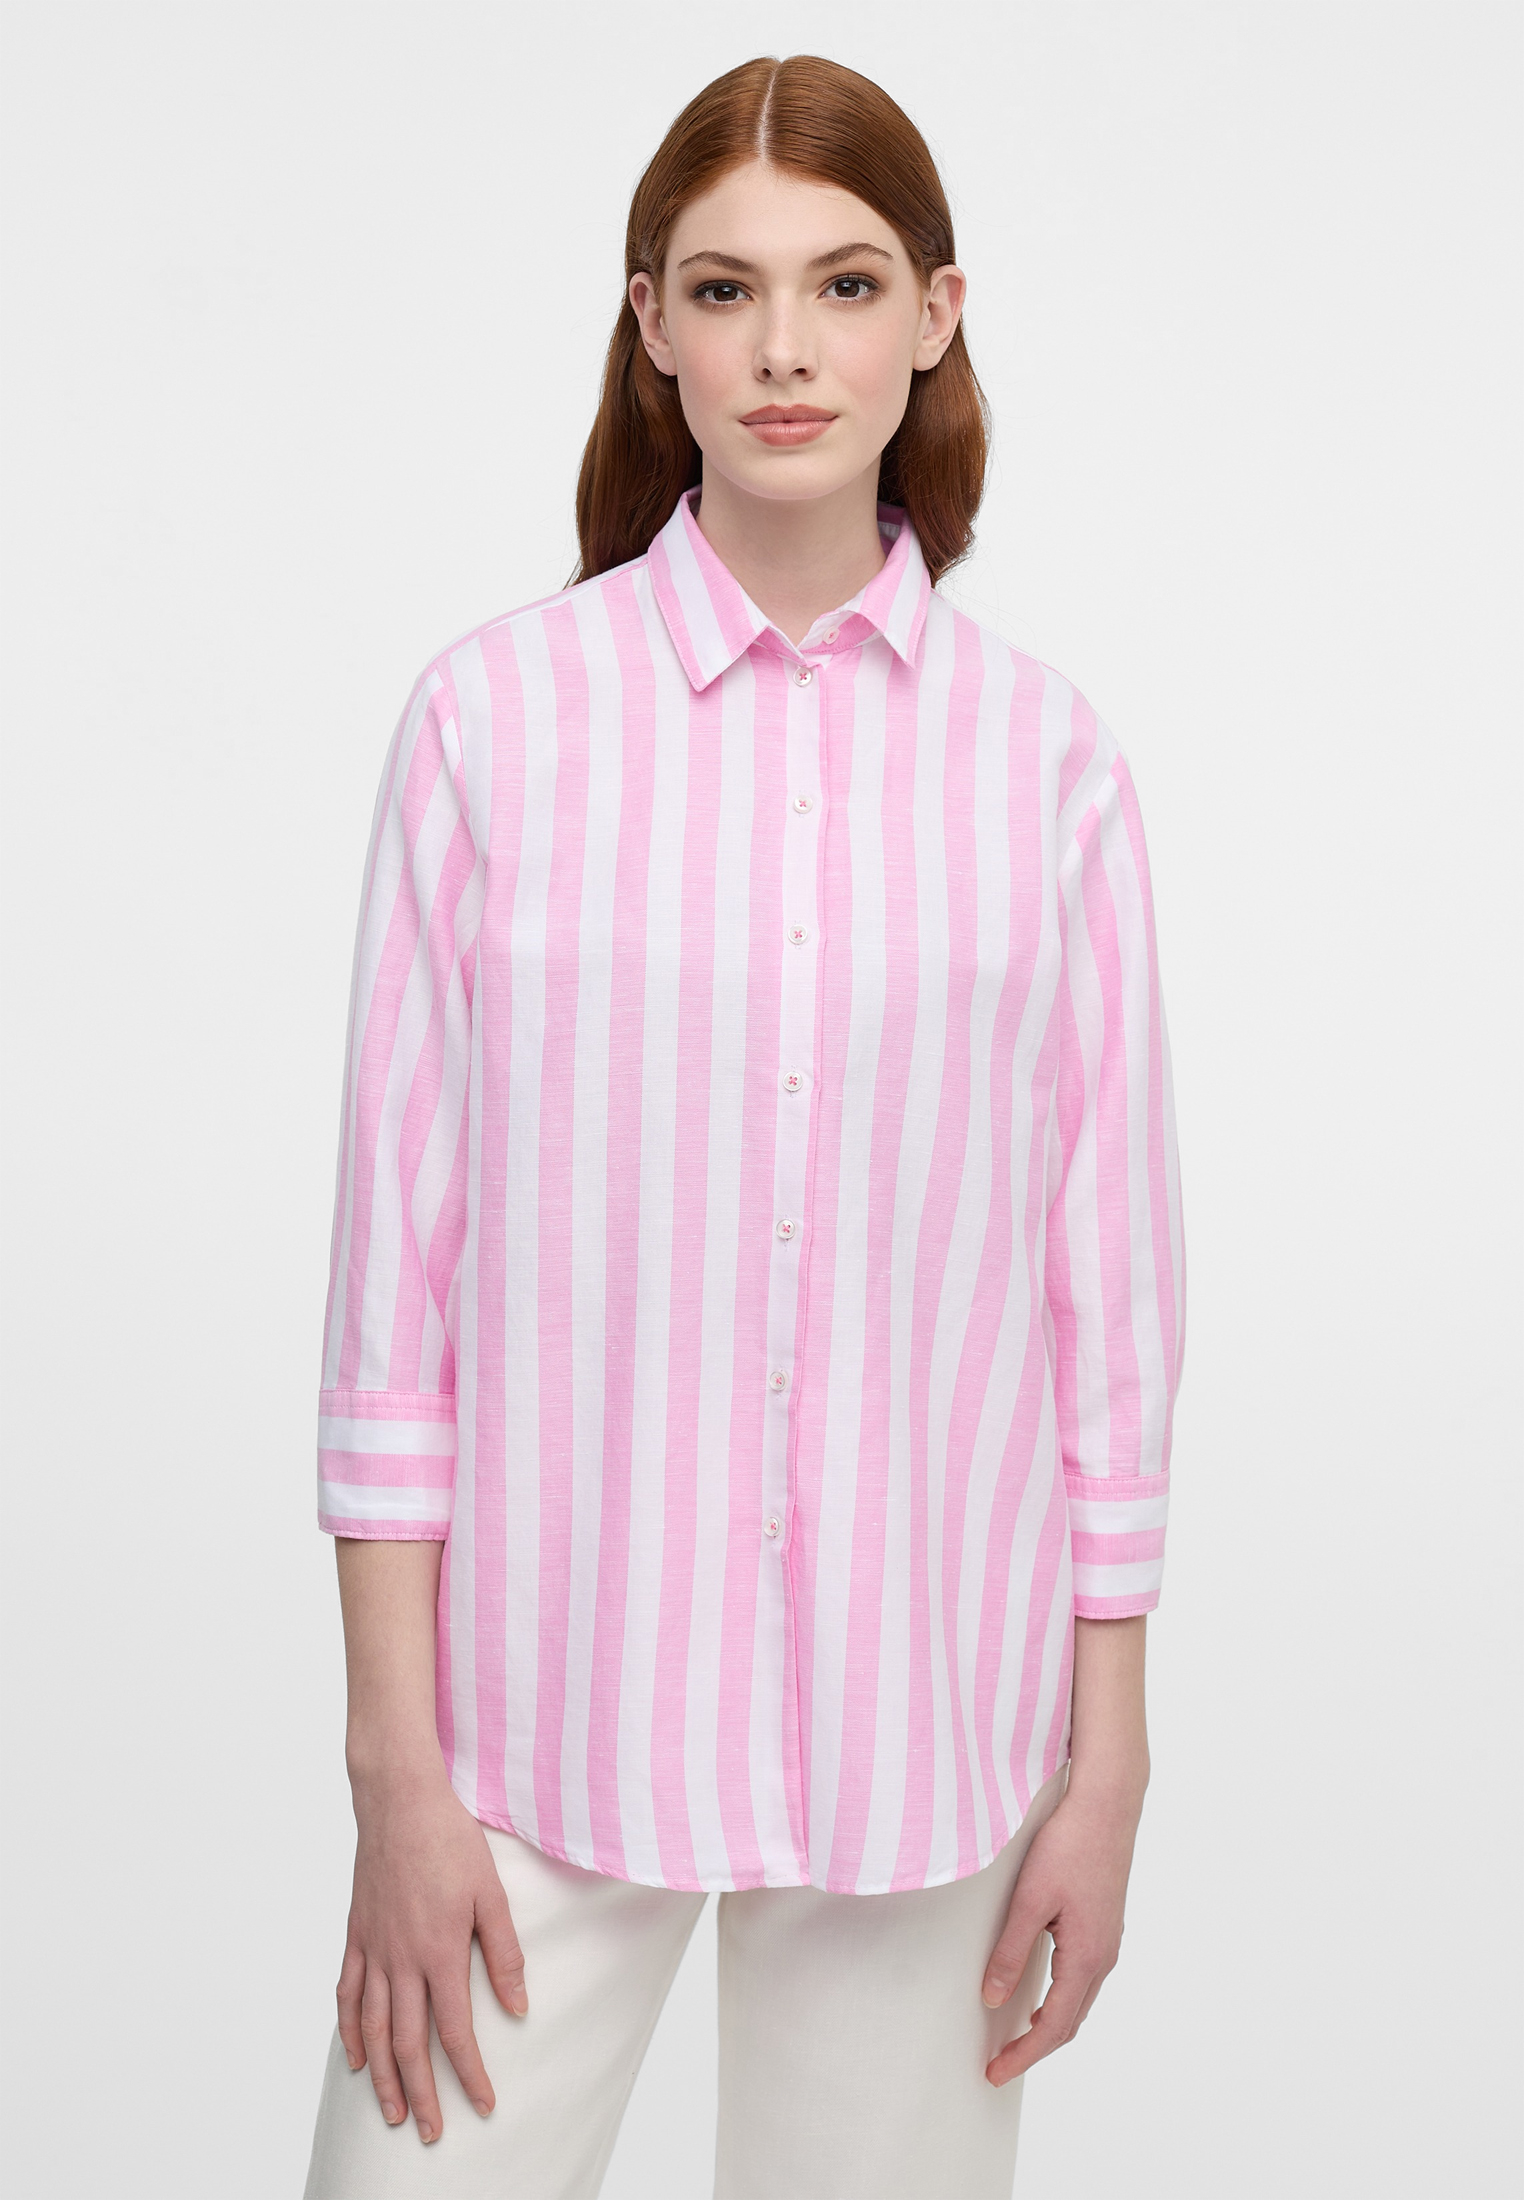 shirt-blouse in striped 3/4 | rose | rose | | sleeves 2BL03967-15-11-36-3/4 36